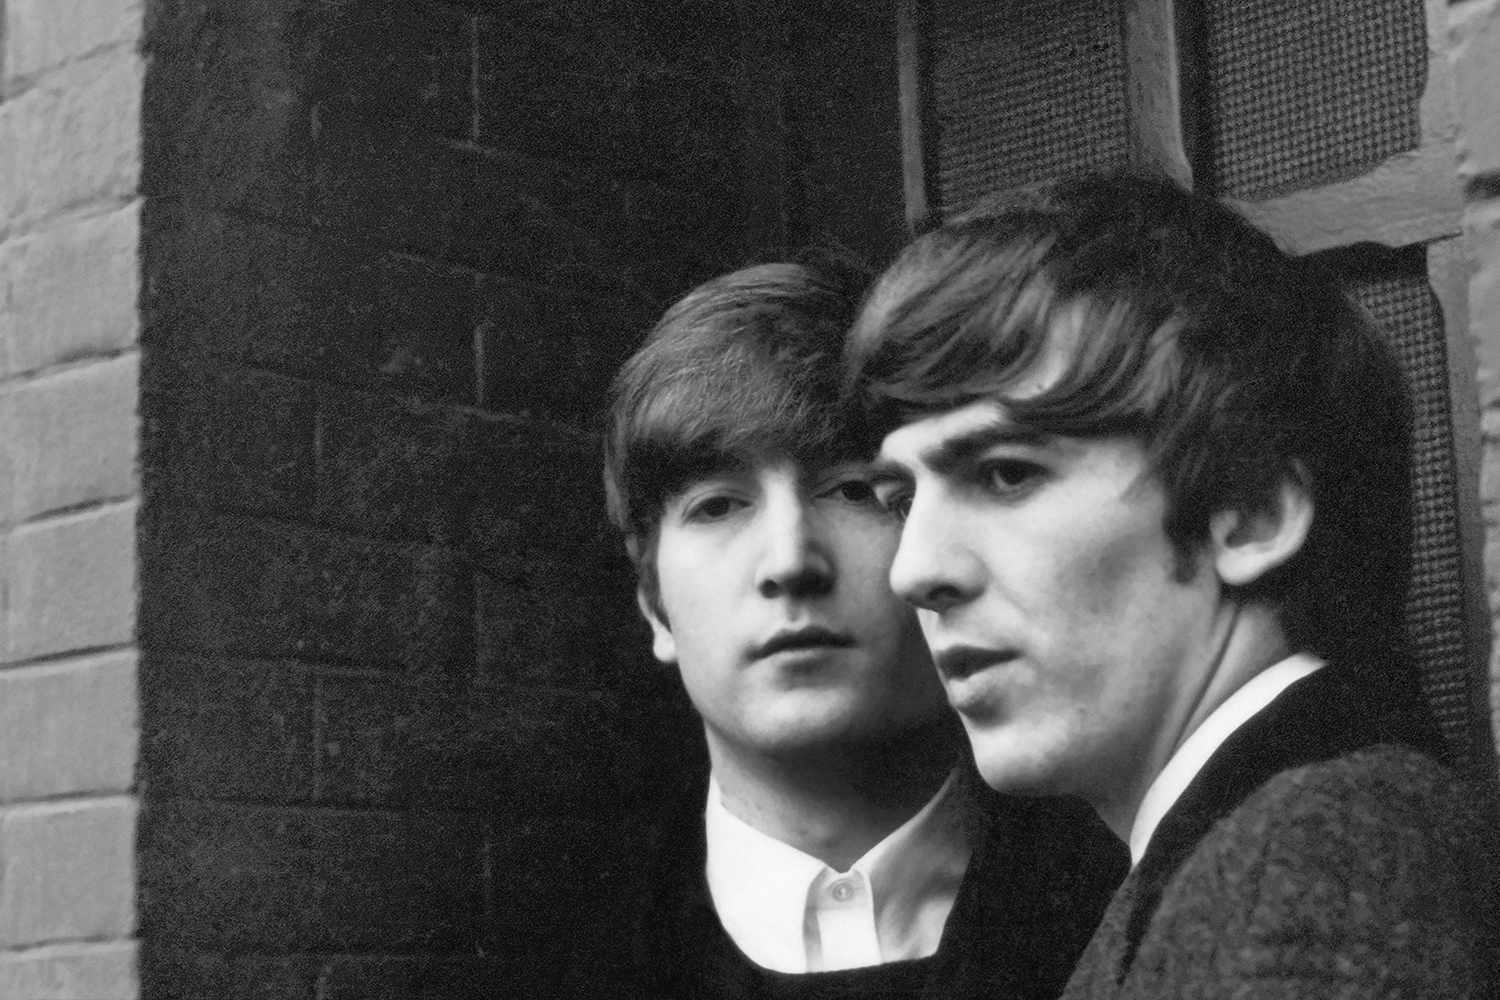 Check out rare photos from Paul McCartney's Beatlemania era that you won't find anywhere else! 21